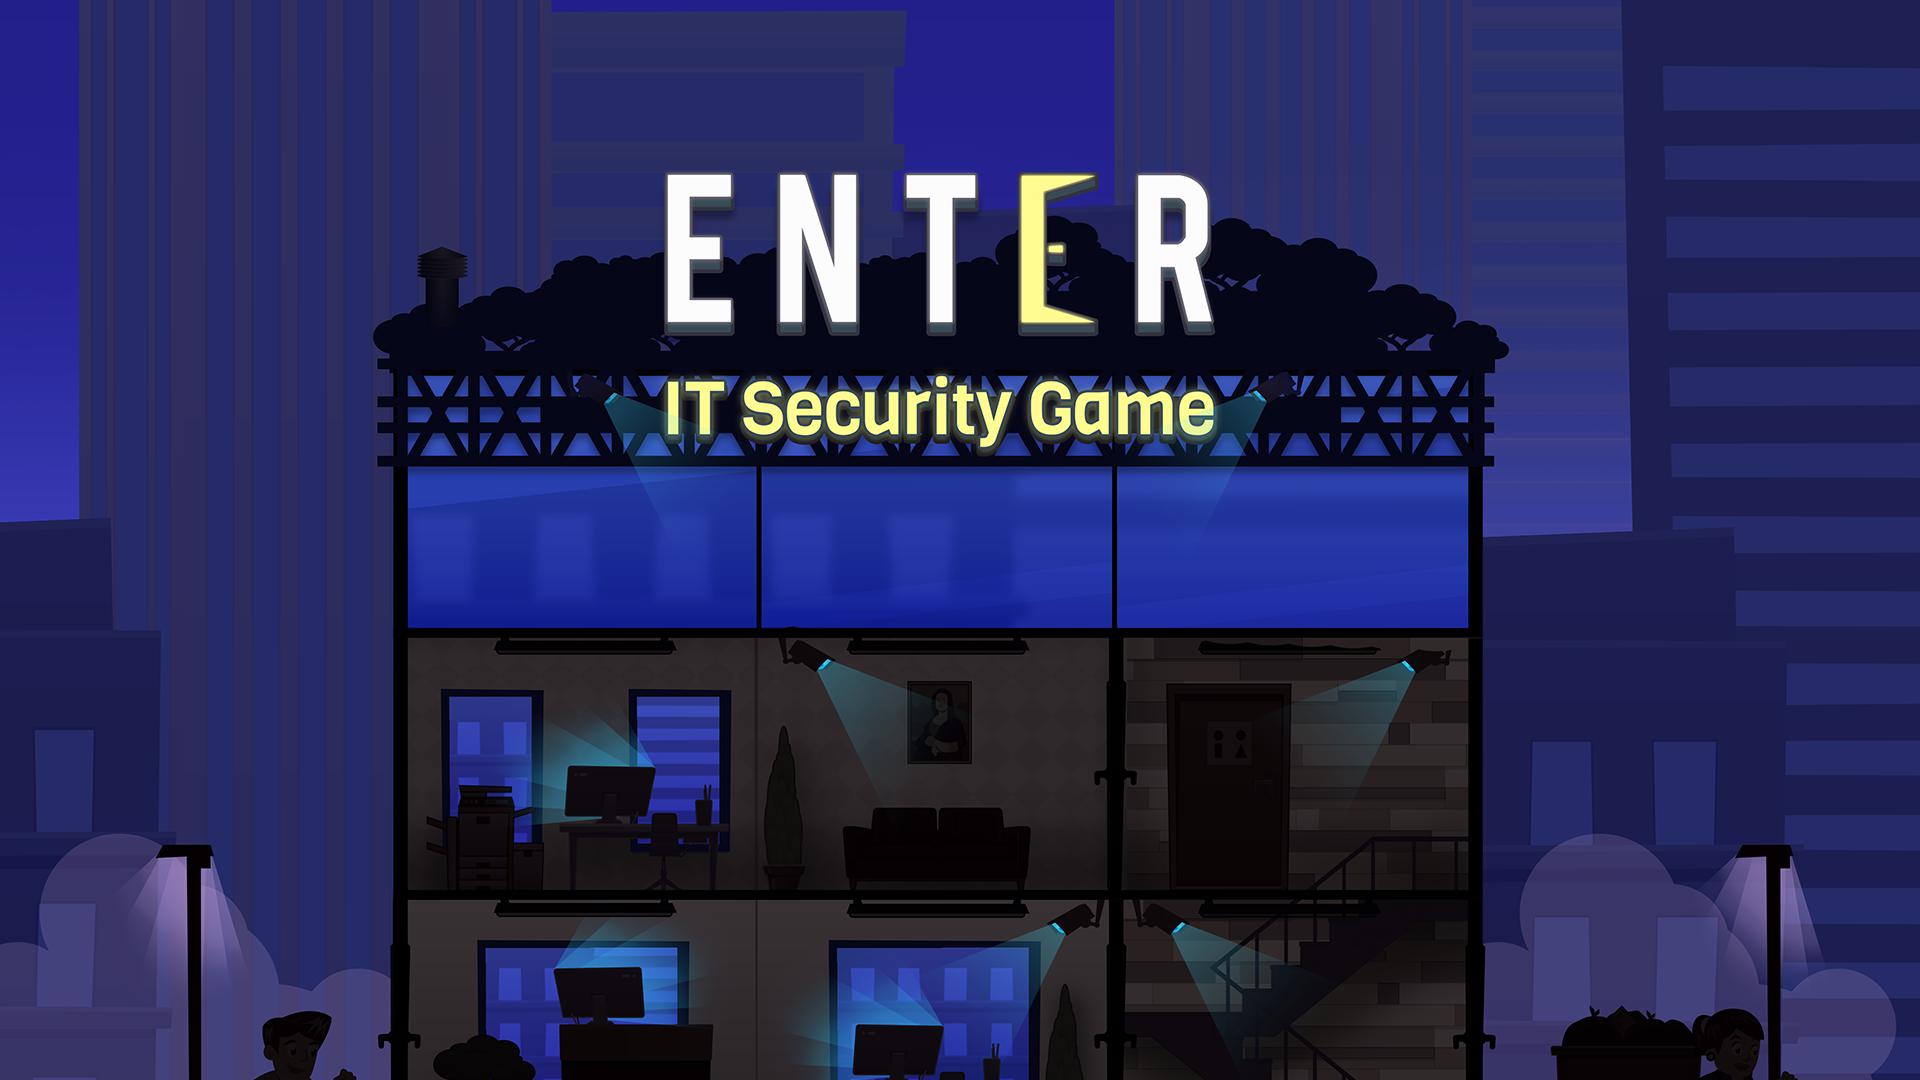 ENTER - IT Security Game